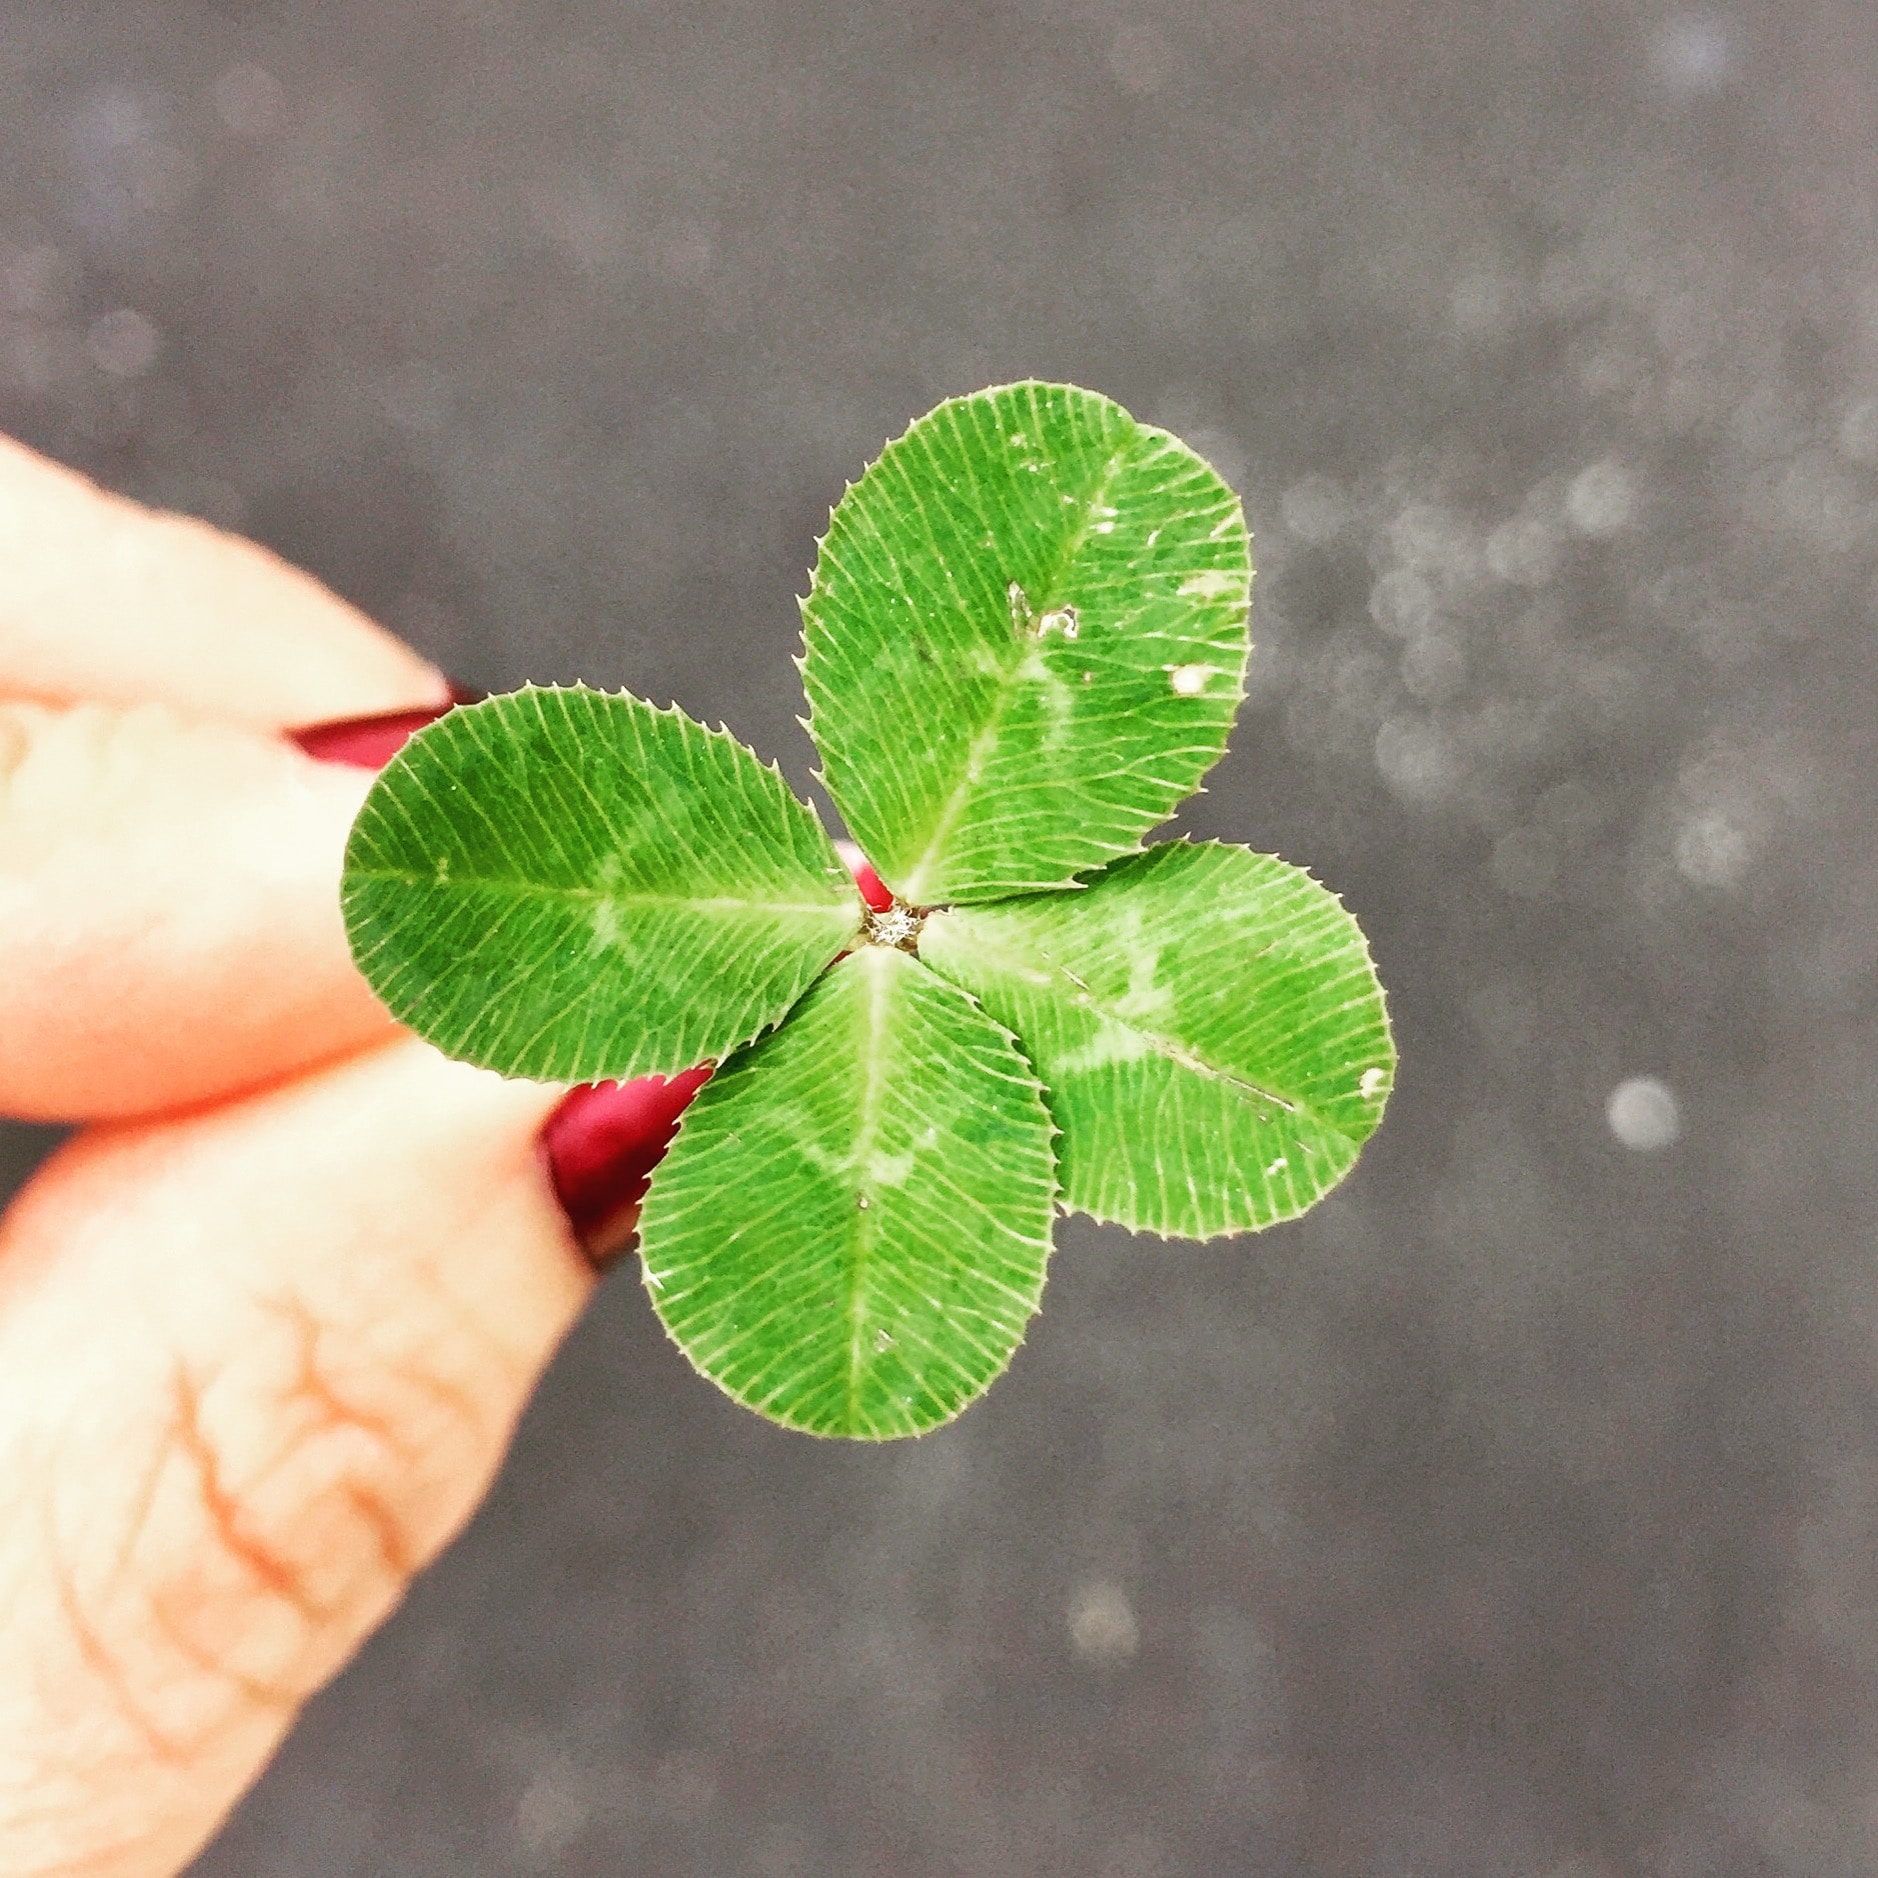 There is an equal amount of good luck as bad luck waiting for you. Photo by Amy Reed on Unsplash